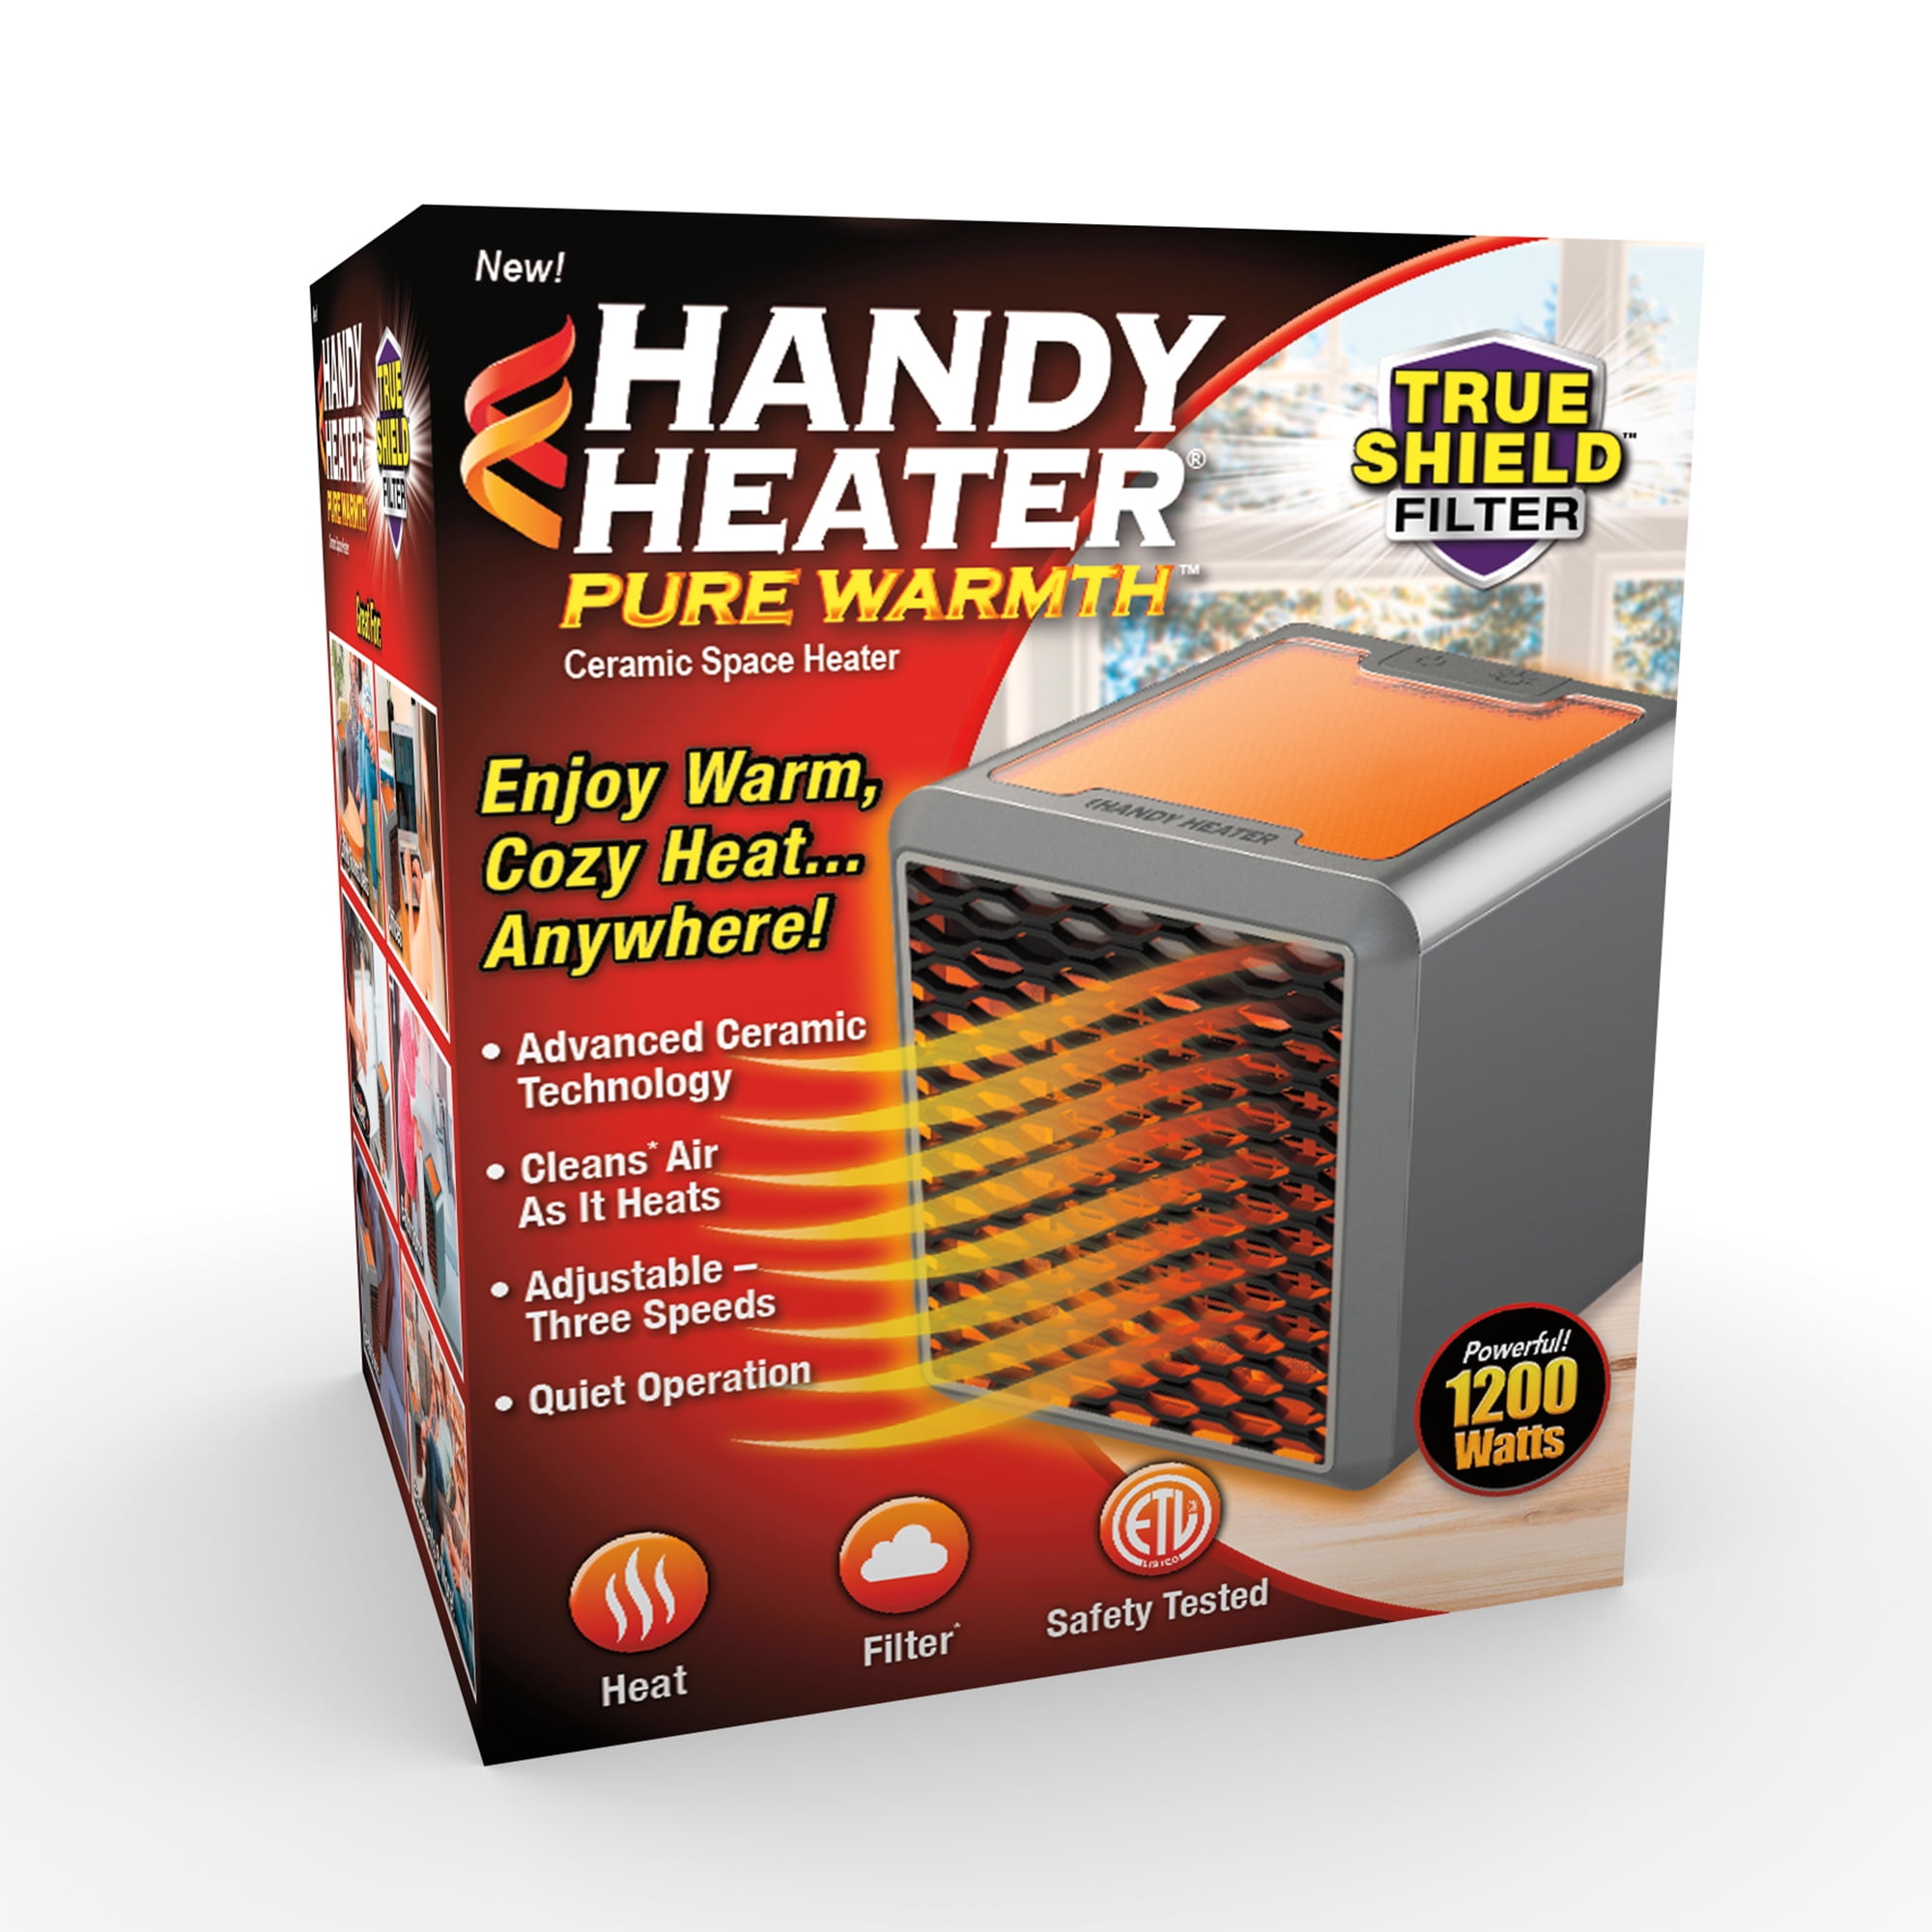 Handy Heater Pure Warmth Powerful Electric Ceramic Space Heater